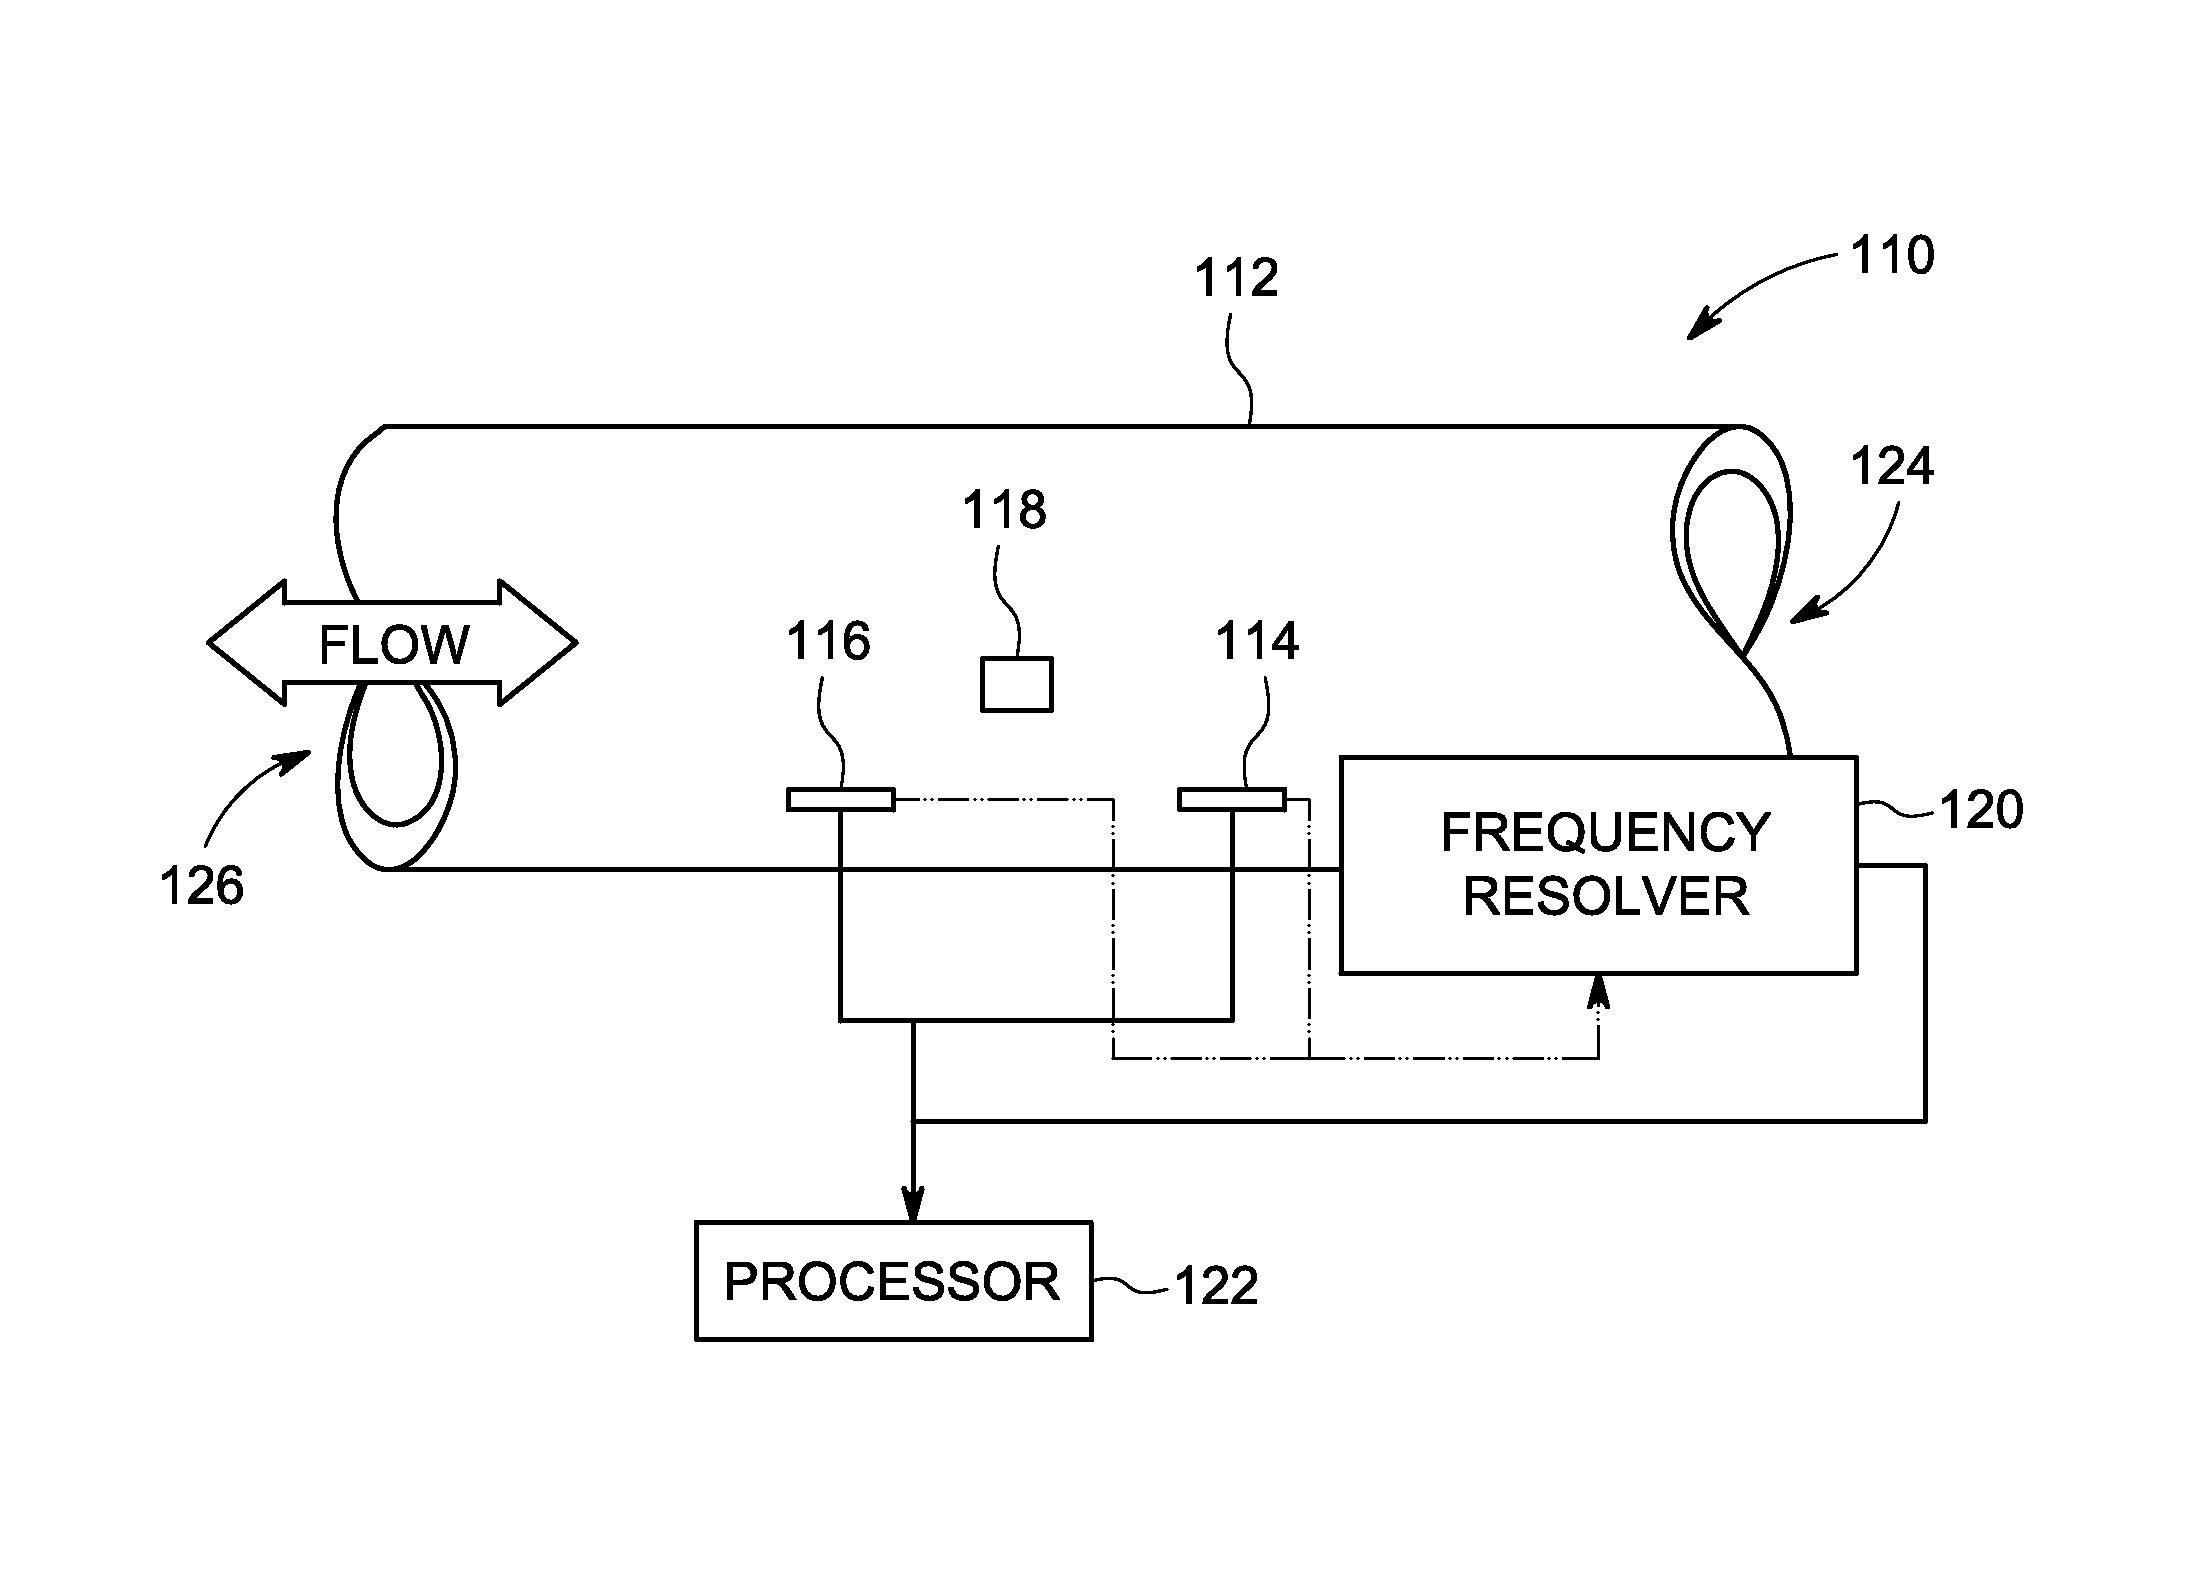 Systems and methods for flow sensing in a conduit